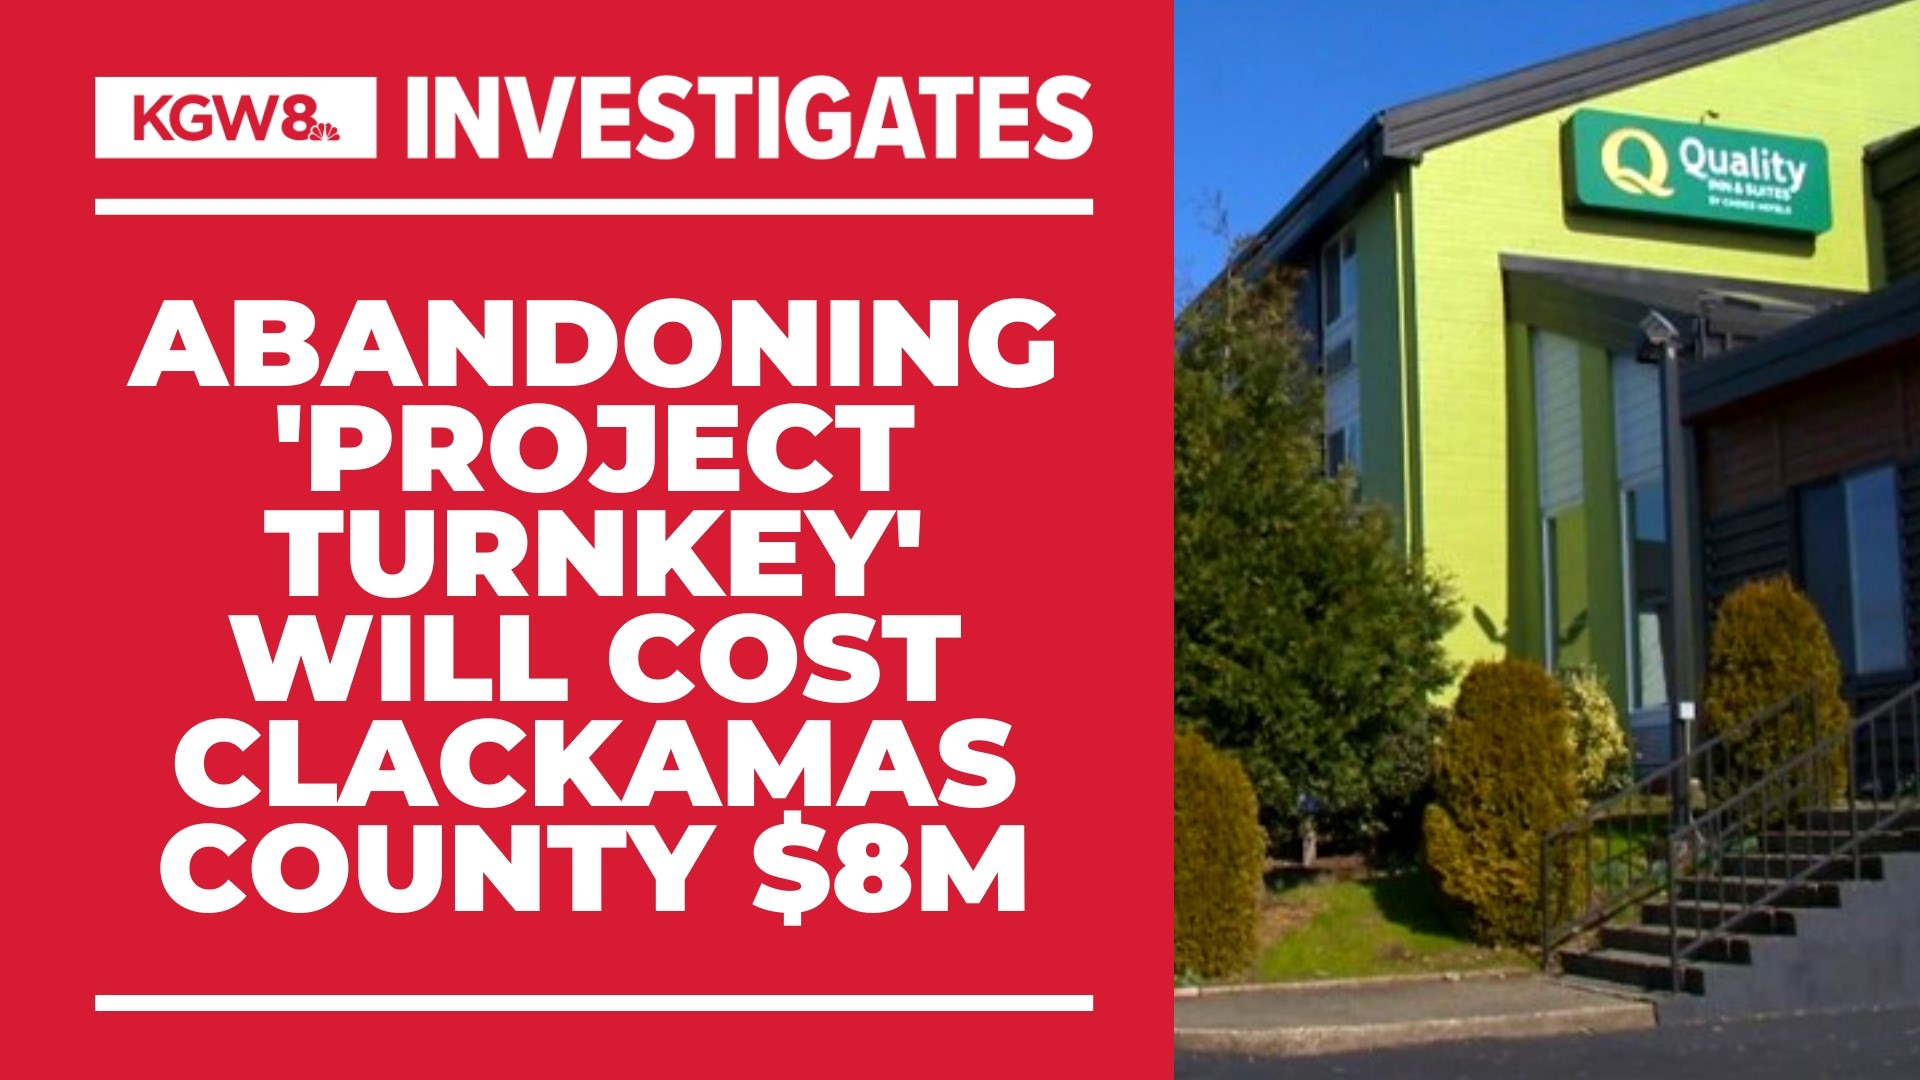 The county must return $8 million it received in grant funds for "Project Turnkey", plus pay the $150,000 it had promised for a down payment for the Quality Inn.